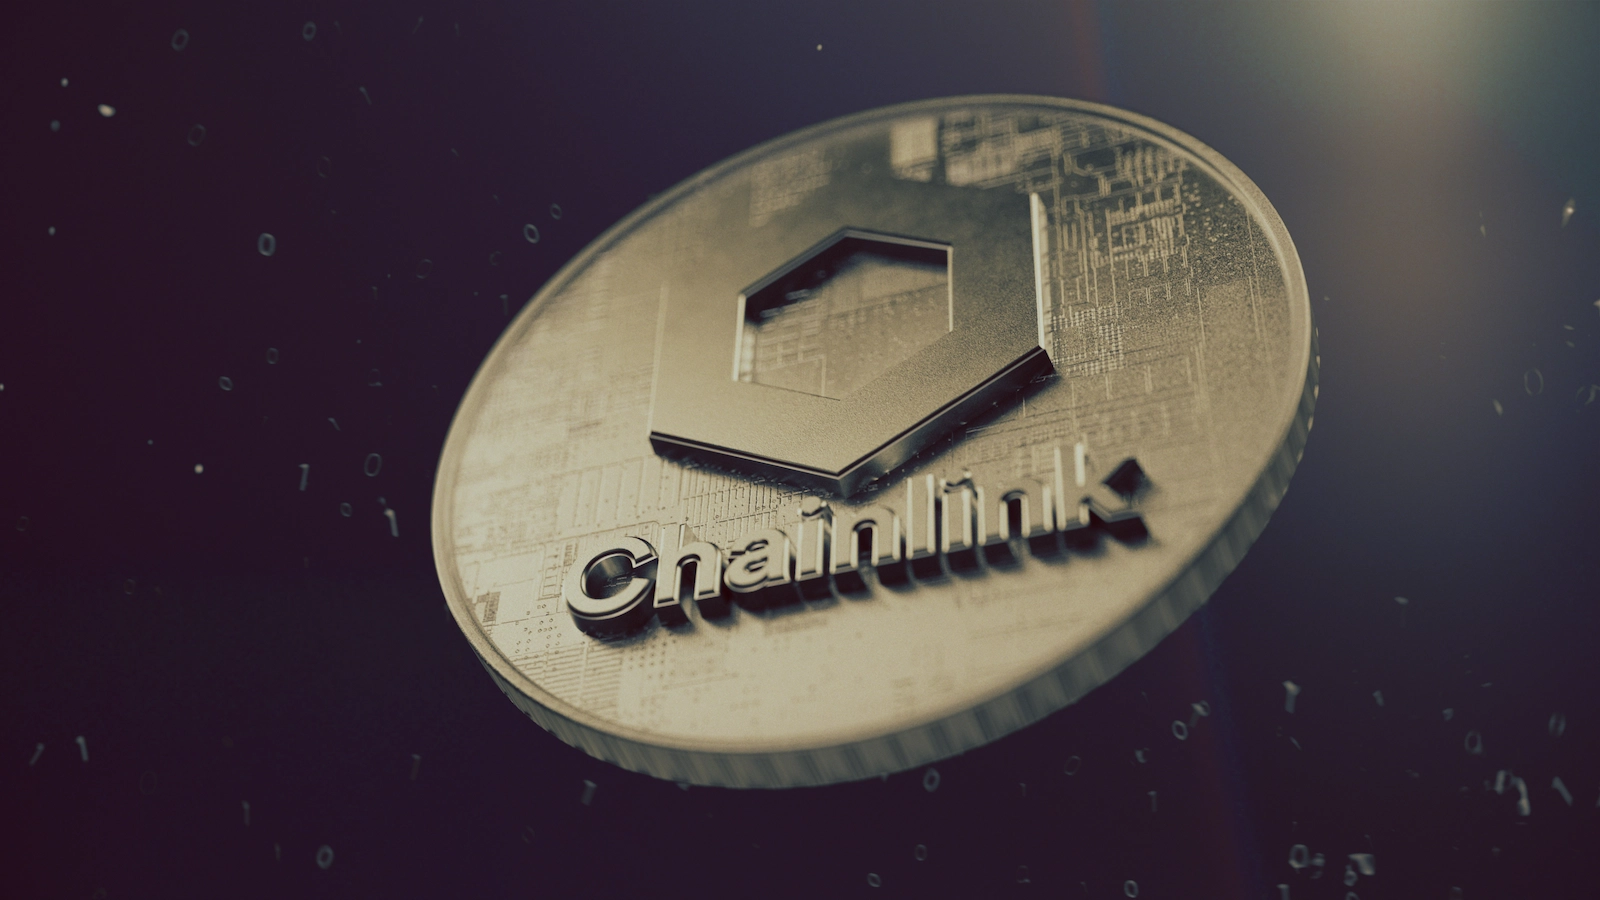 Chainlink has entered into several partnerships, but bearish pressure against LINK price remains.